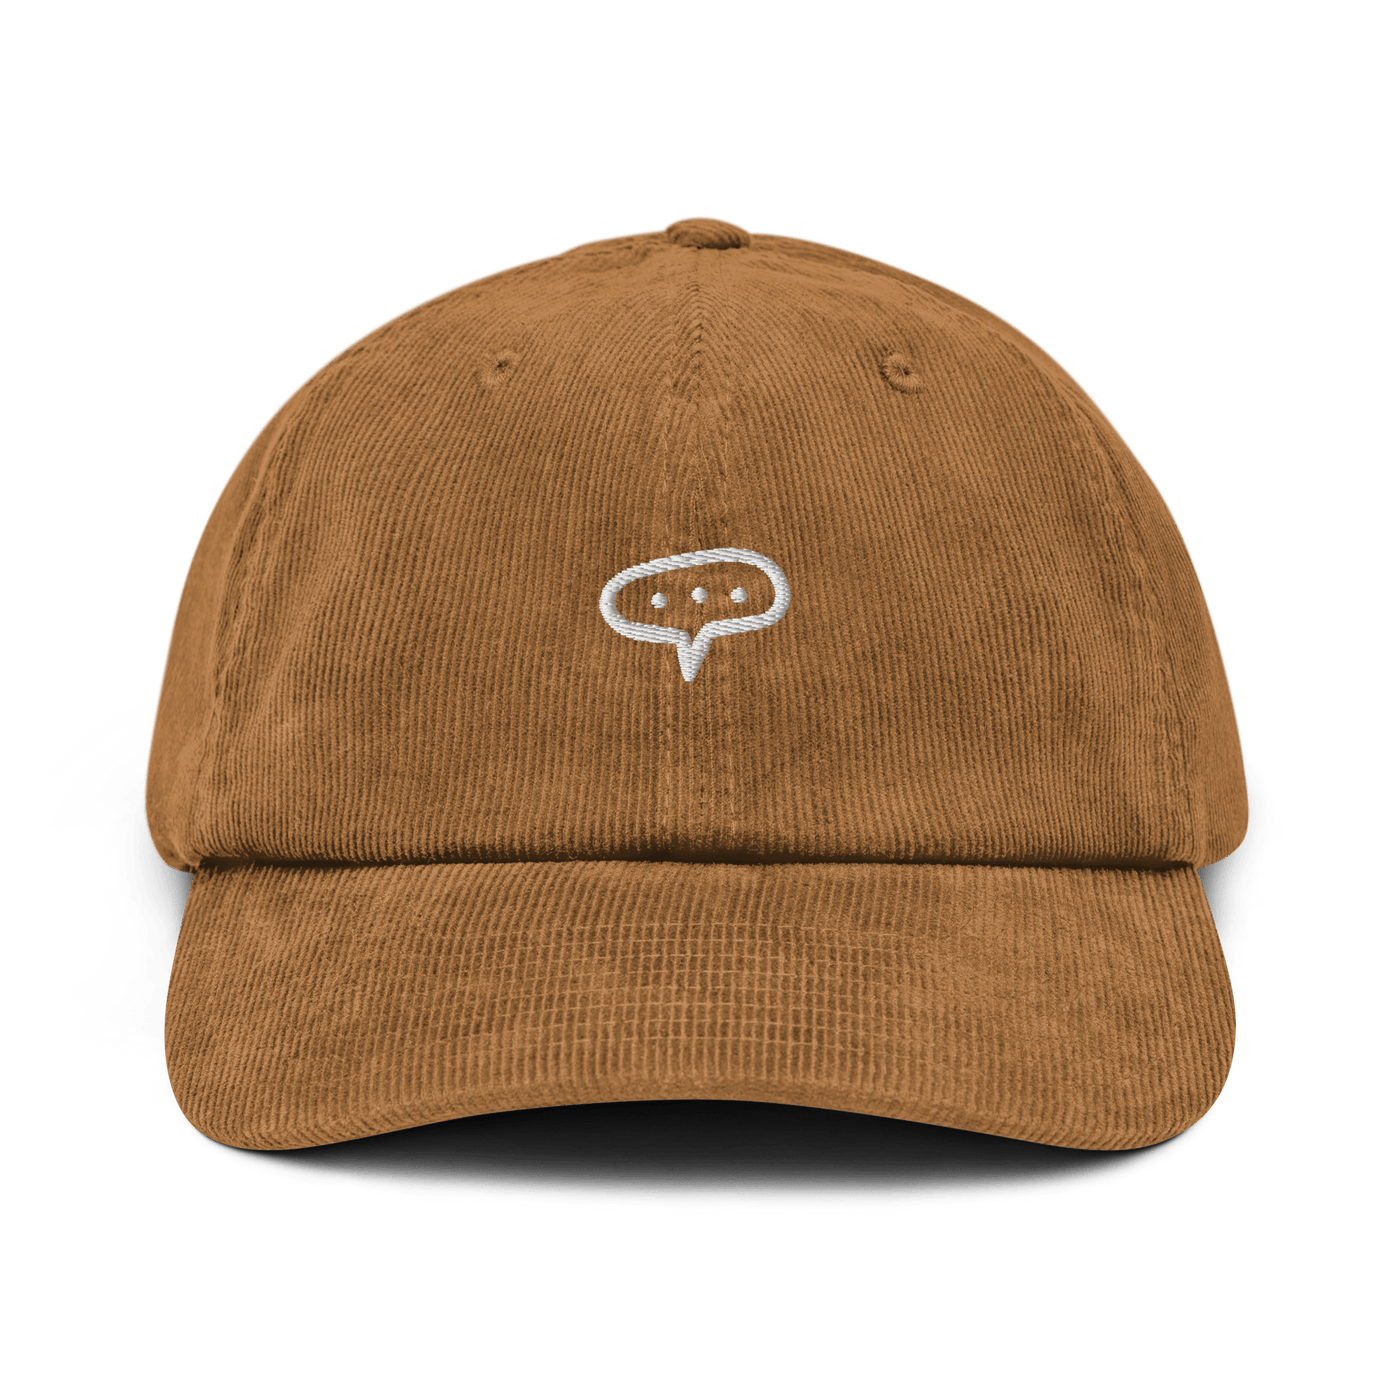 Thinking Corduroy hat - Camel - - Just Another Cap Store